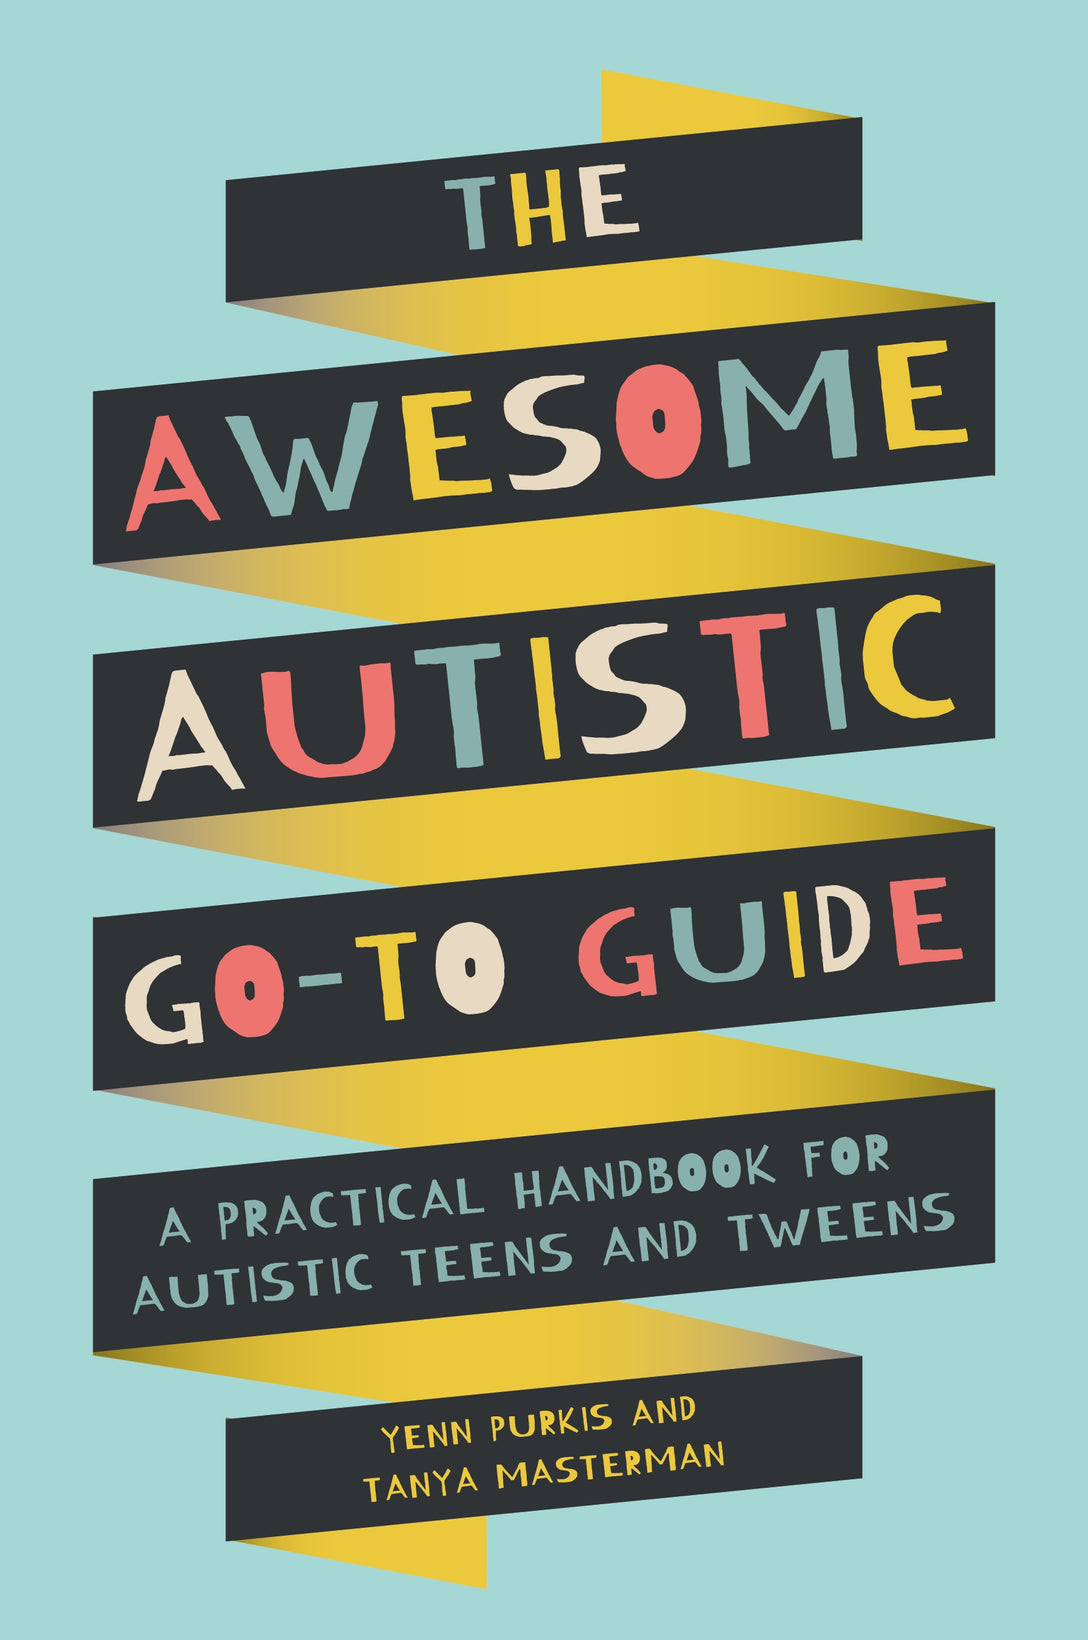 The Awesome Autistic Go-To Guide by Yenn Purkis, Tanya Masterman